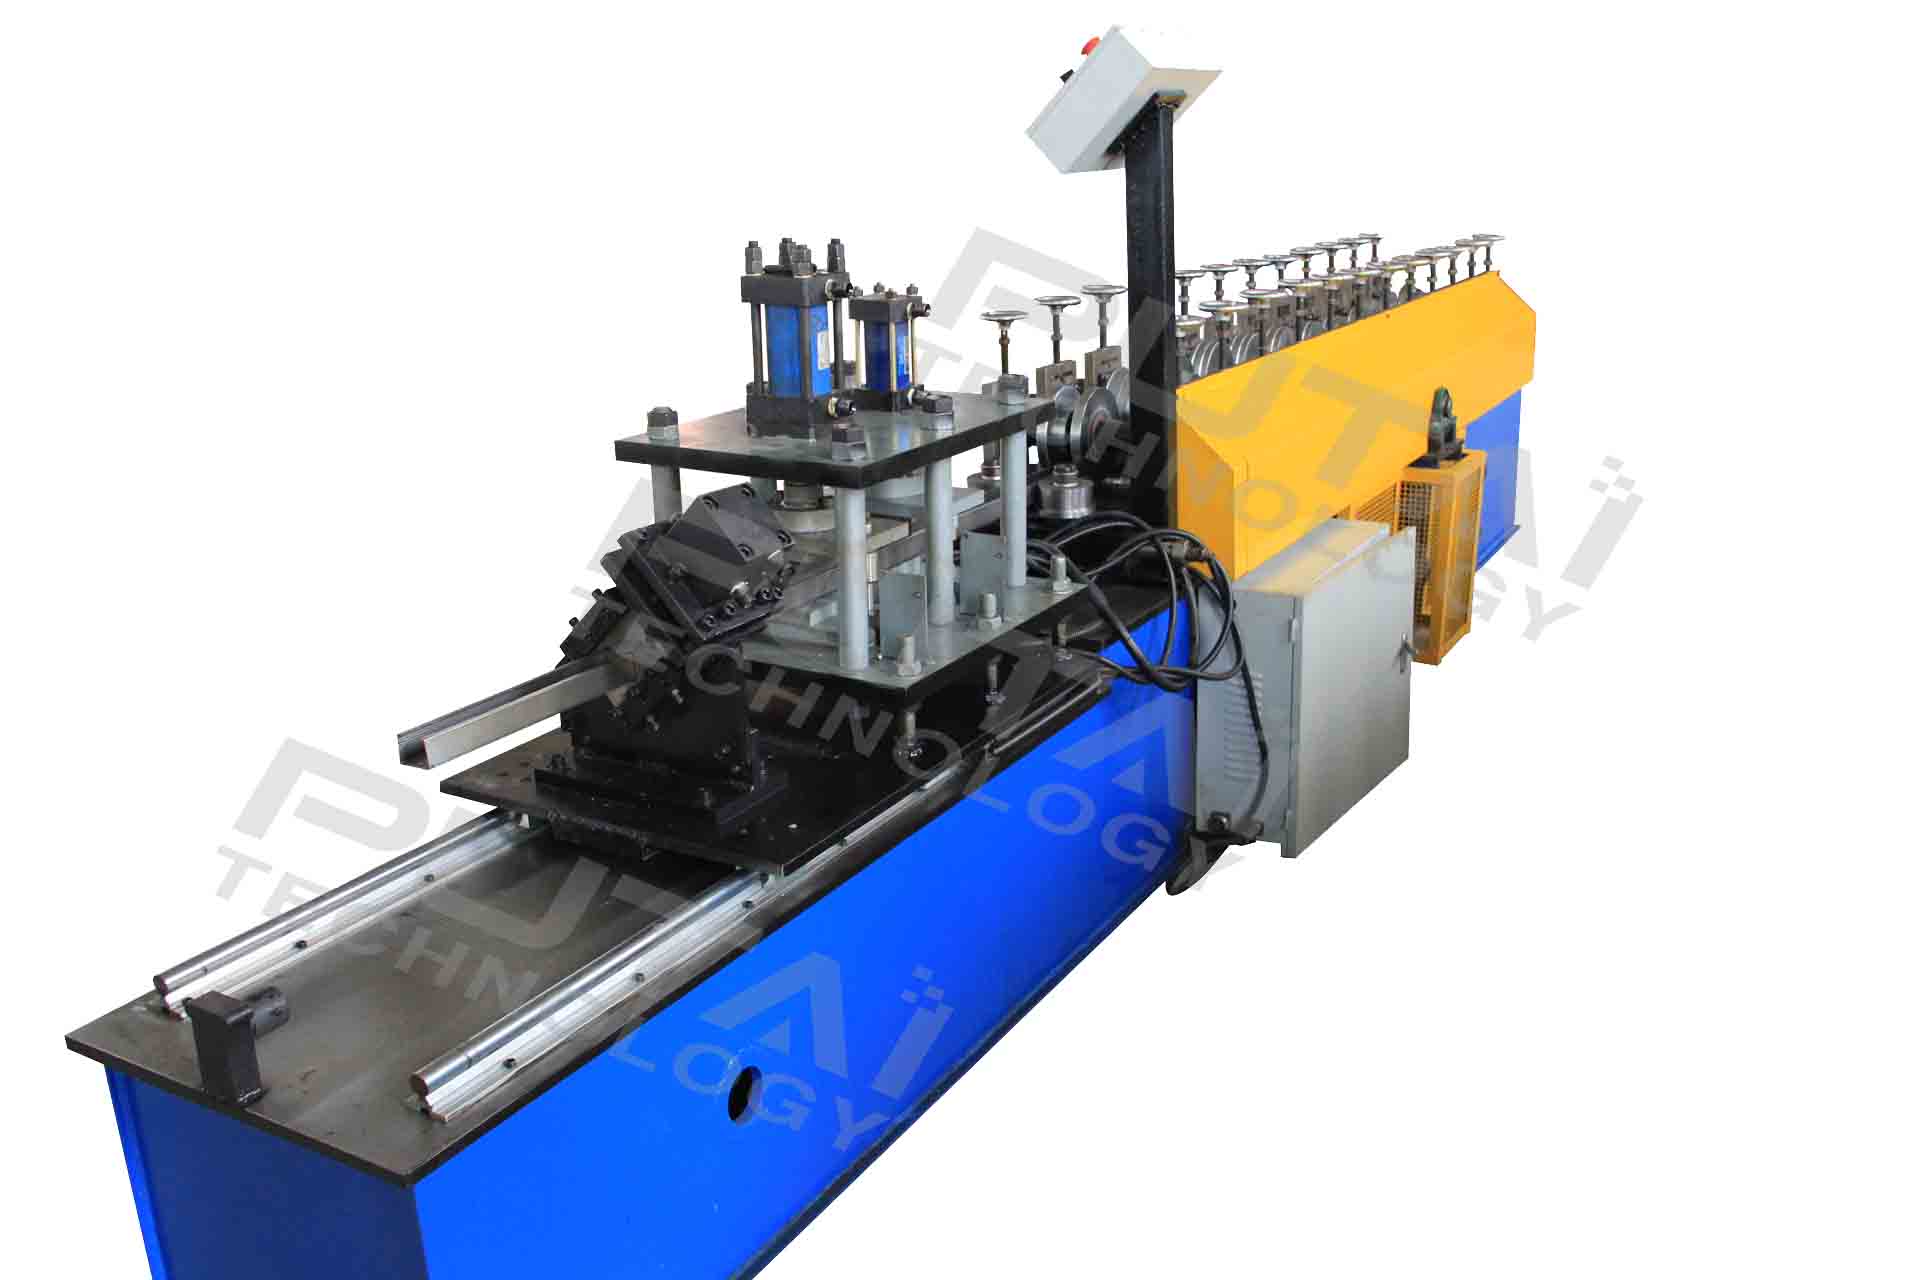 Cee section machinery